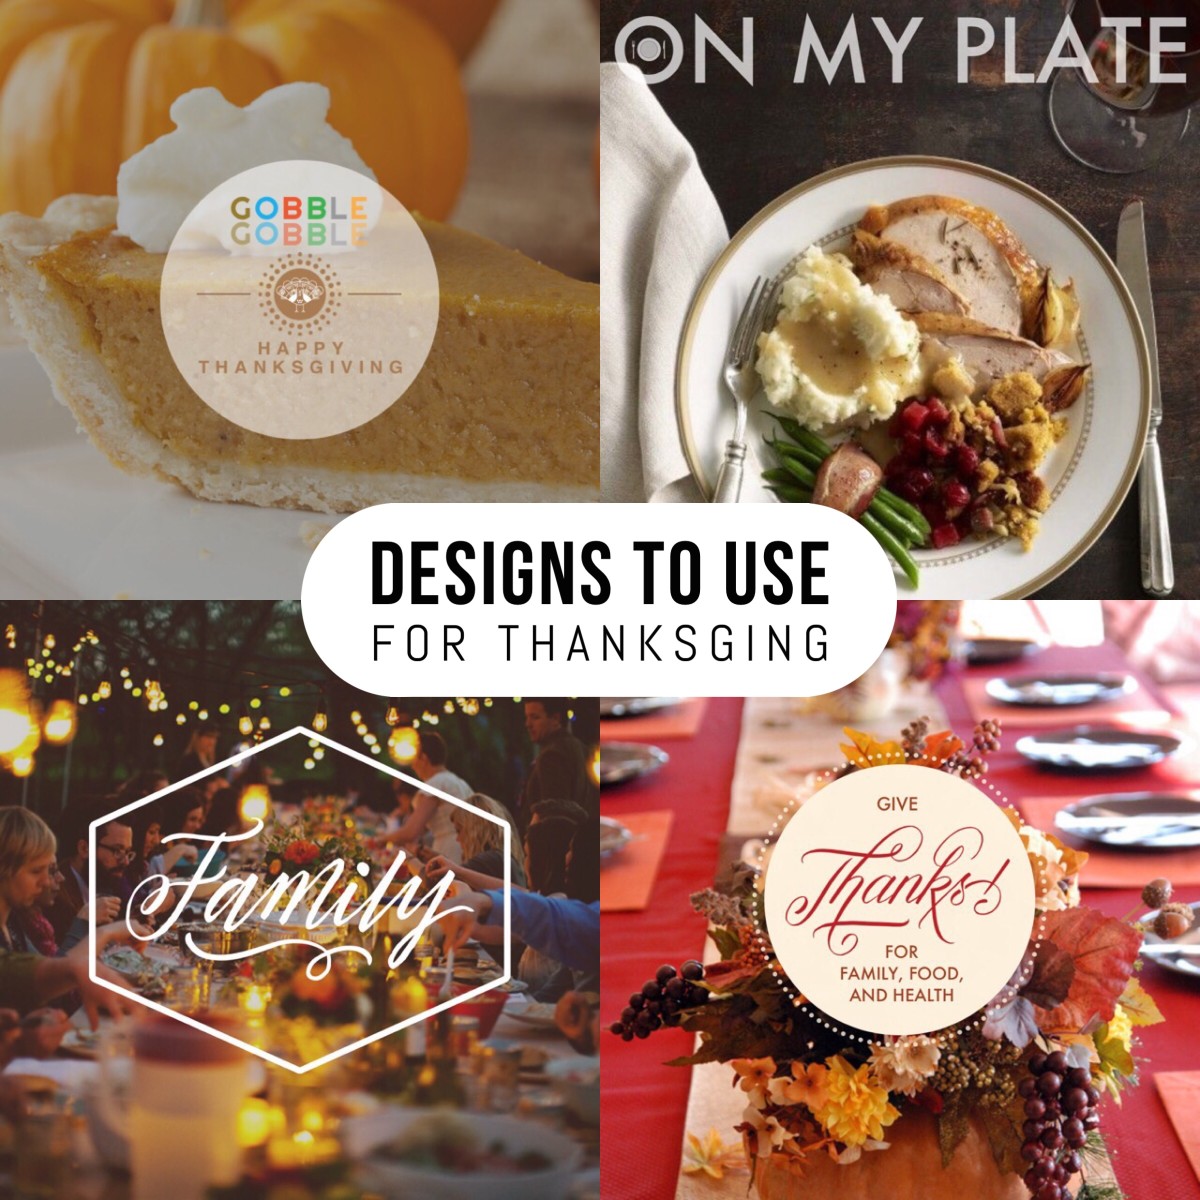 5 Photo Designs to Use for Thanksgiving